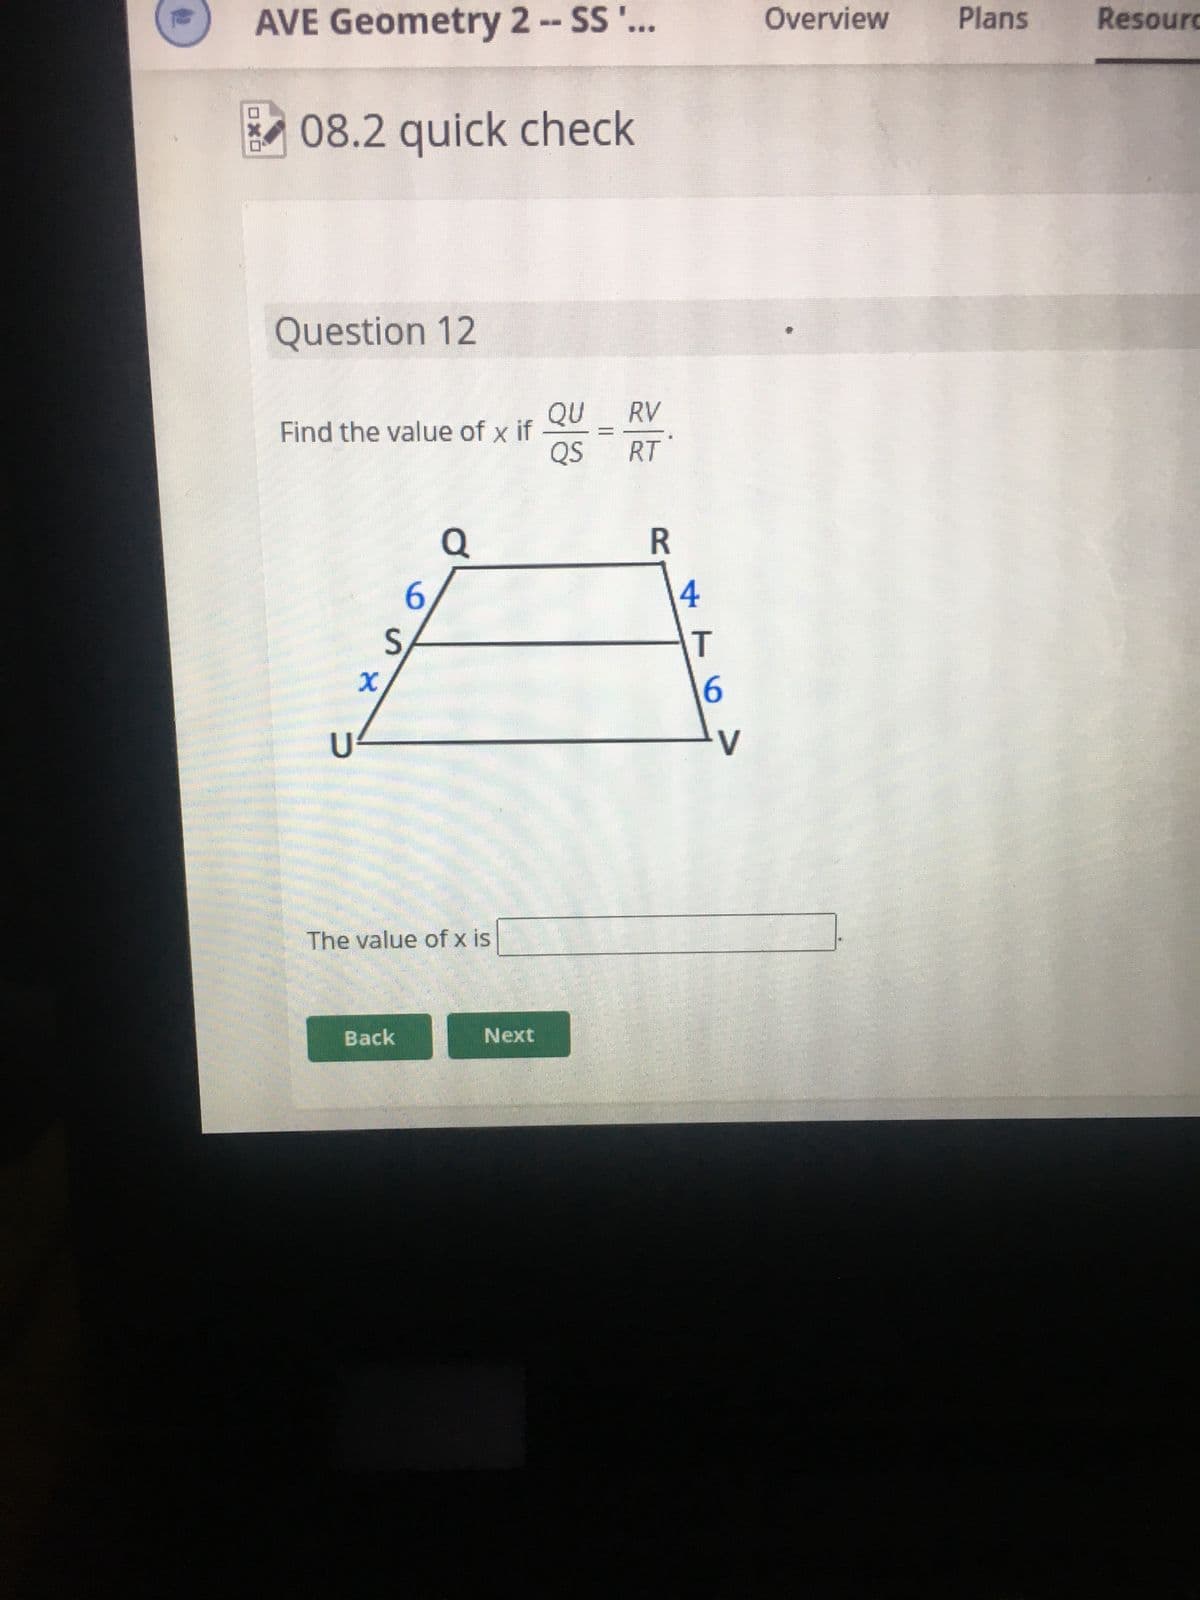 **08.2 Quick Check**

**Question 12**

Find the value of \( x \) if \(\dfrac{QU}{QS} = \dfrac{RV}{RT} \).

Diagram Explanation: 
The diagram depicts a trapezoid with parallel sides \( \overline{QU} \) and \( \overline{RV} \). The lengths of the four segments are given as follows:
- \( QU = 6 \)
- \( QS = x \)
- \( RV = 4 \)
- \( RT = 6 \)

The ratio of the segments on one side of the trapezoid is equal to the ratio of the segments on the other side. 

\[
\dfrac{QU}{QS} = \dfrac{RV}{RT}
\]

With the provided segment lengths, algebraic manipulation will allow finding the value of \( x \).

**The value of \( x \) is:** [Text Box]

[Back] [Next]